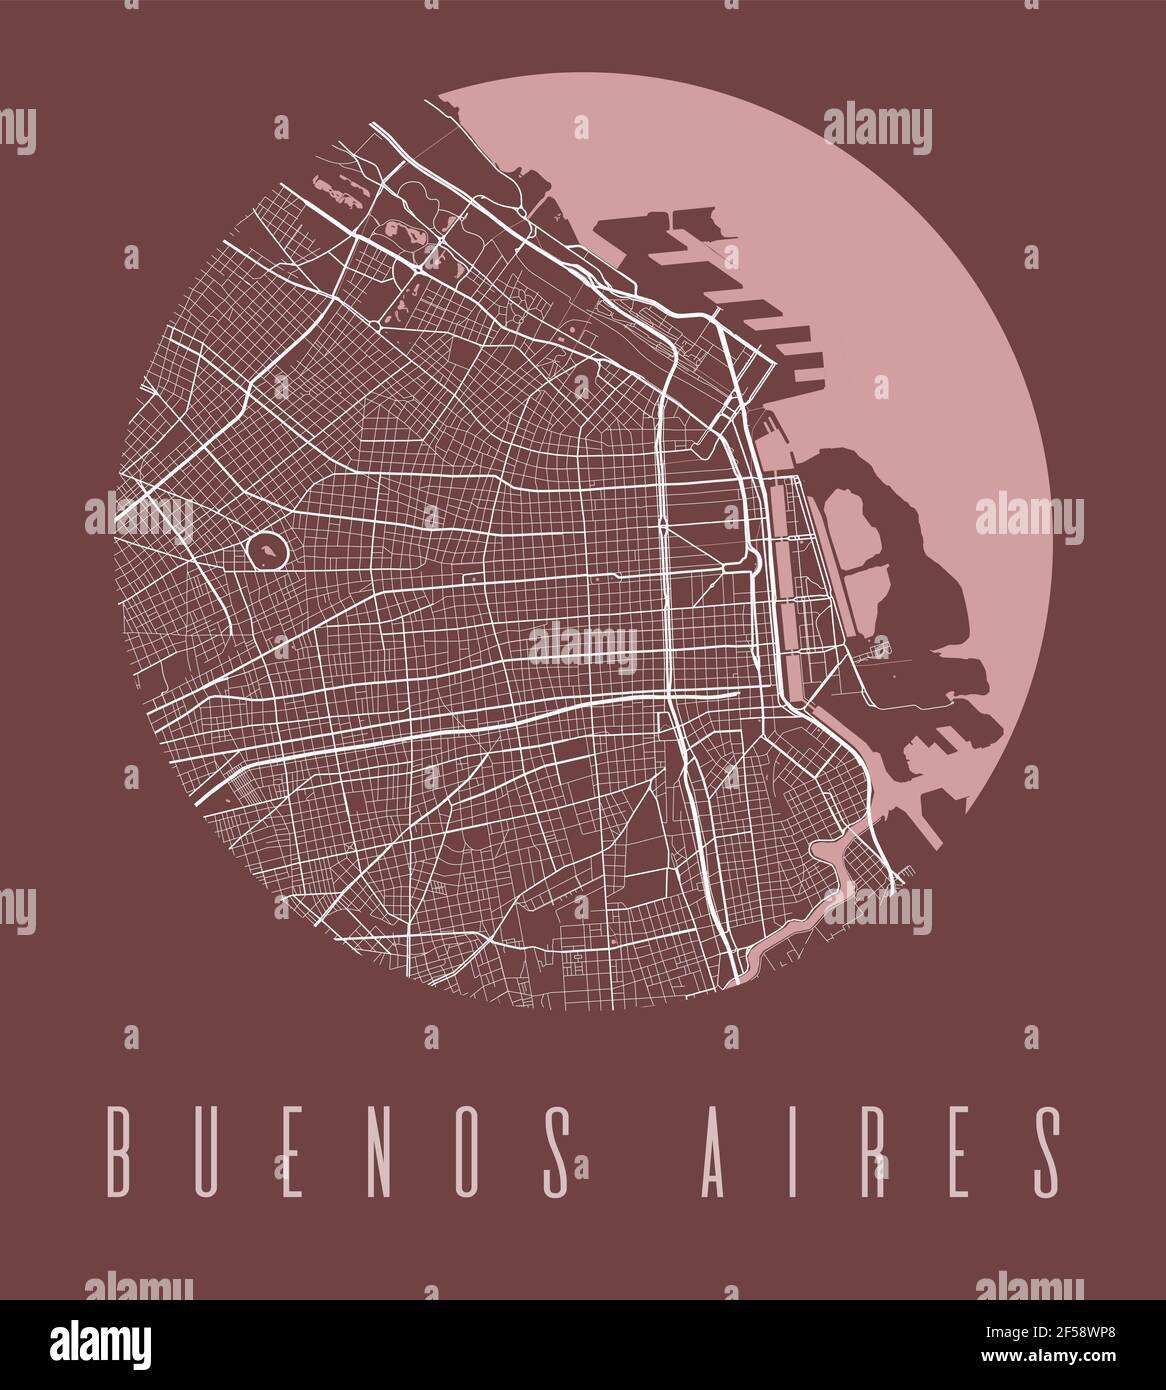 Buenos Aires map poster. Decorative design street map of Buenos Aires city. Cityscape aria panorama silhouette aerial view, typography style. Land, ri Stock Vector